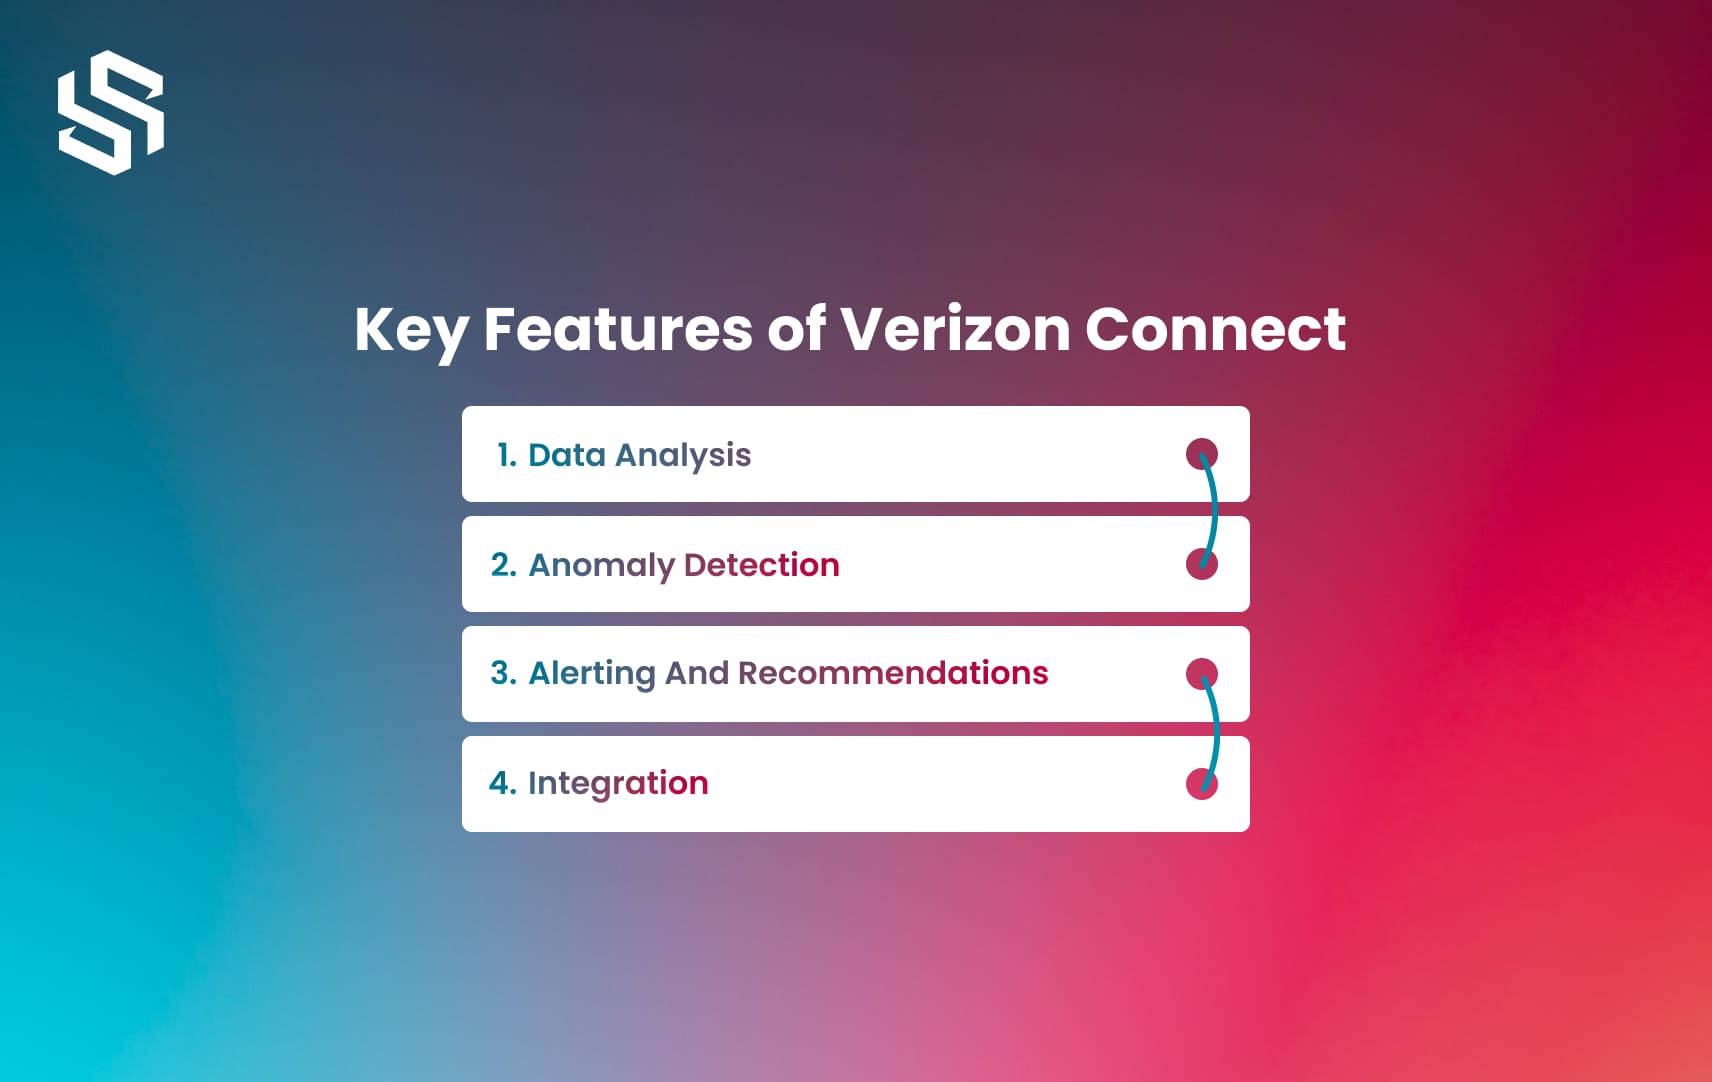 Key Features of Verizon Connect